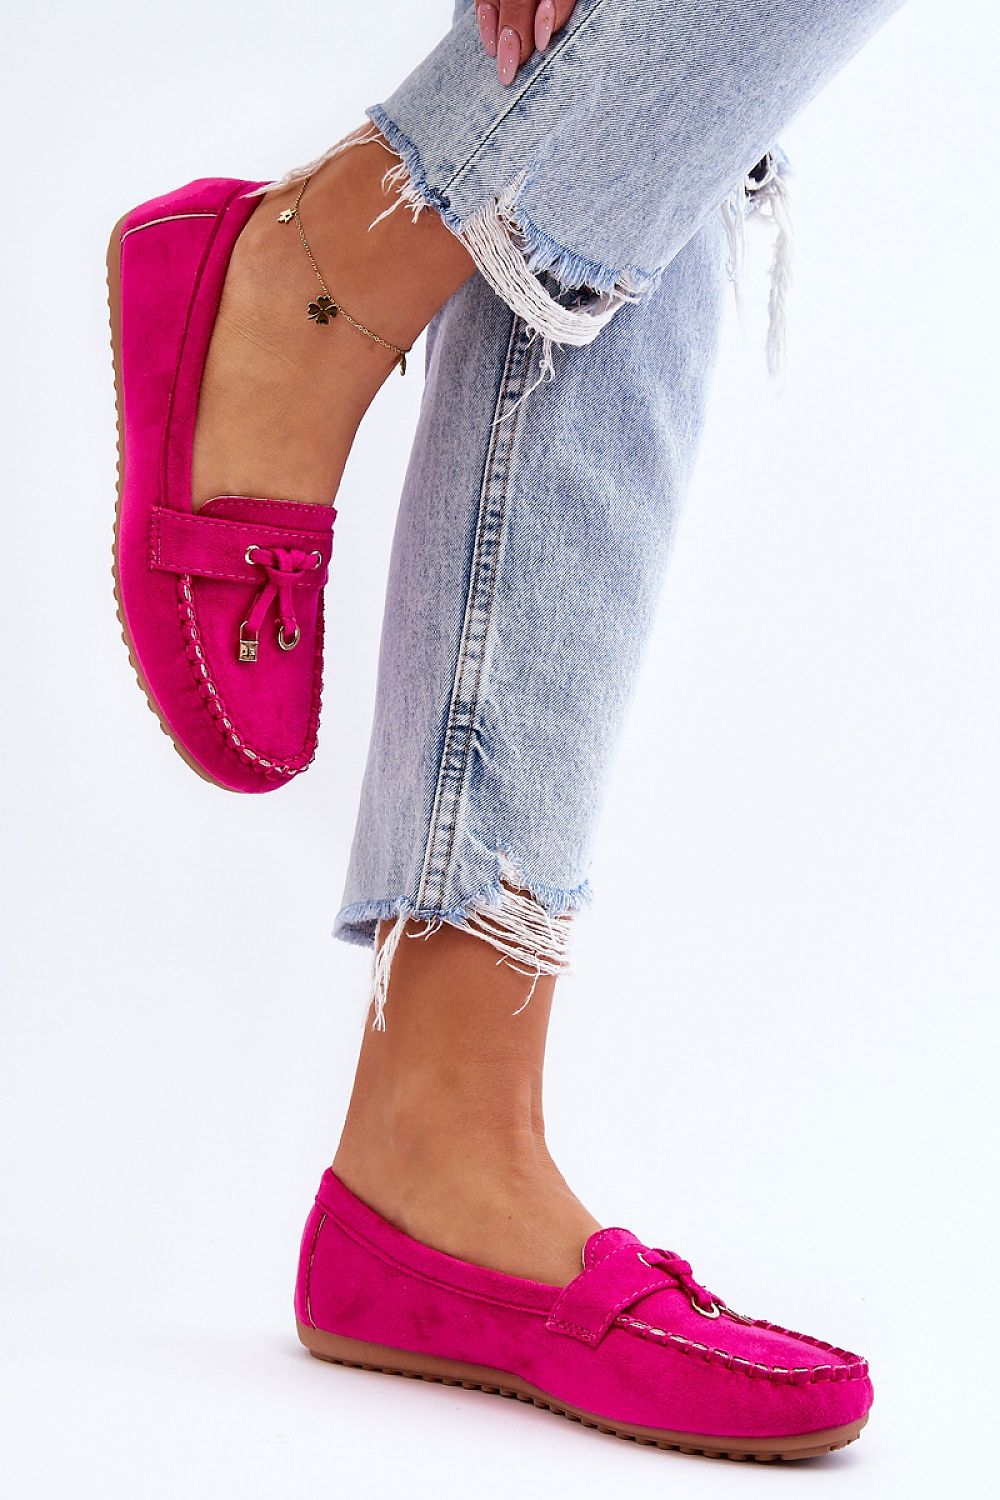 Women's Eco-Suede Blakely Moccasins - Fuchsia